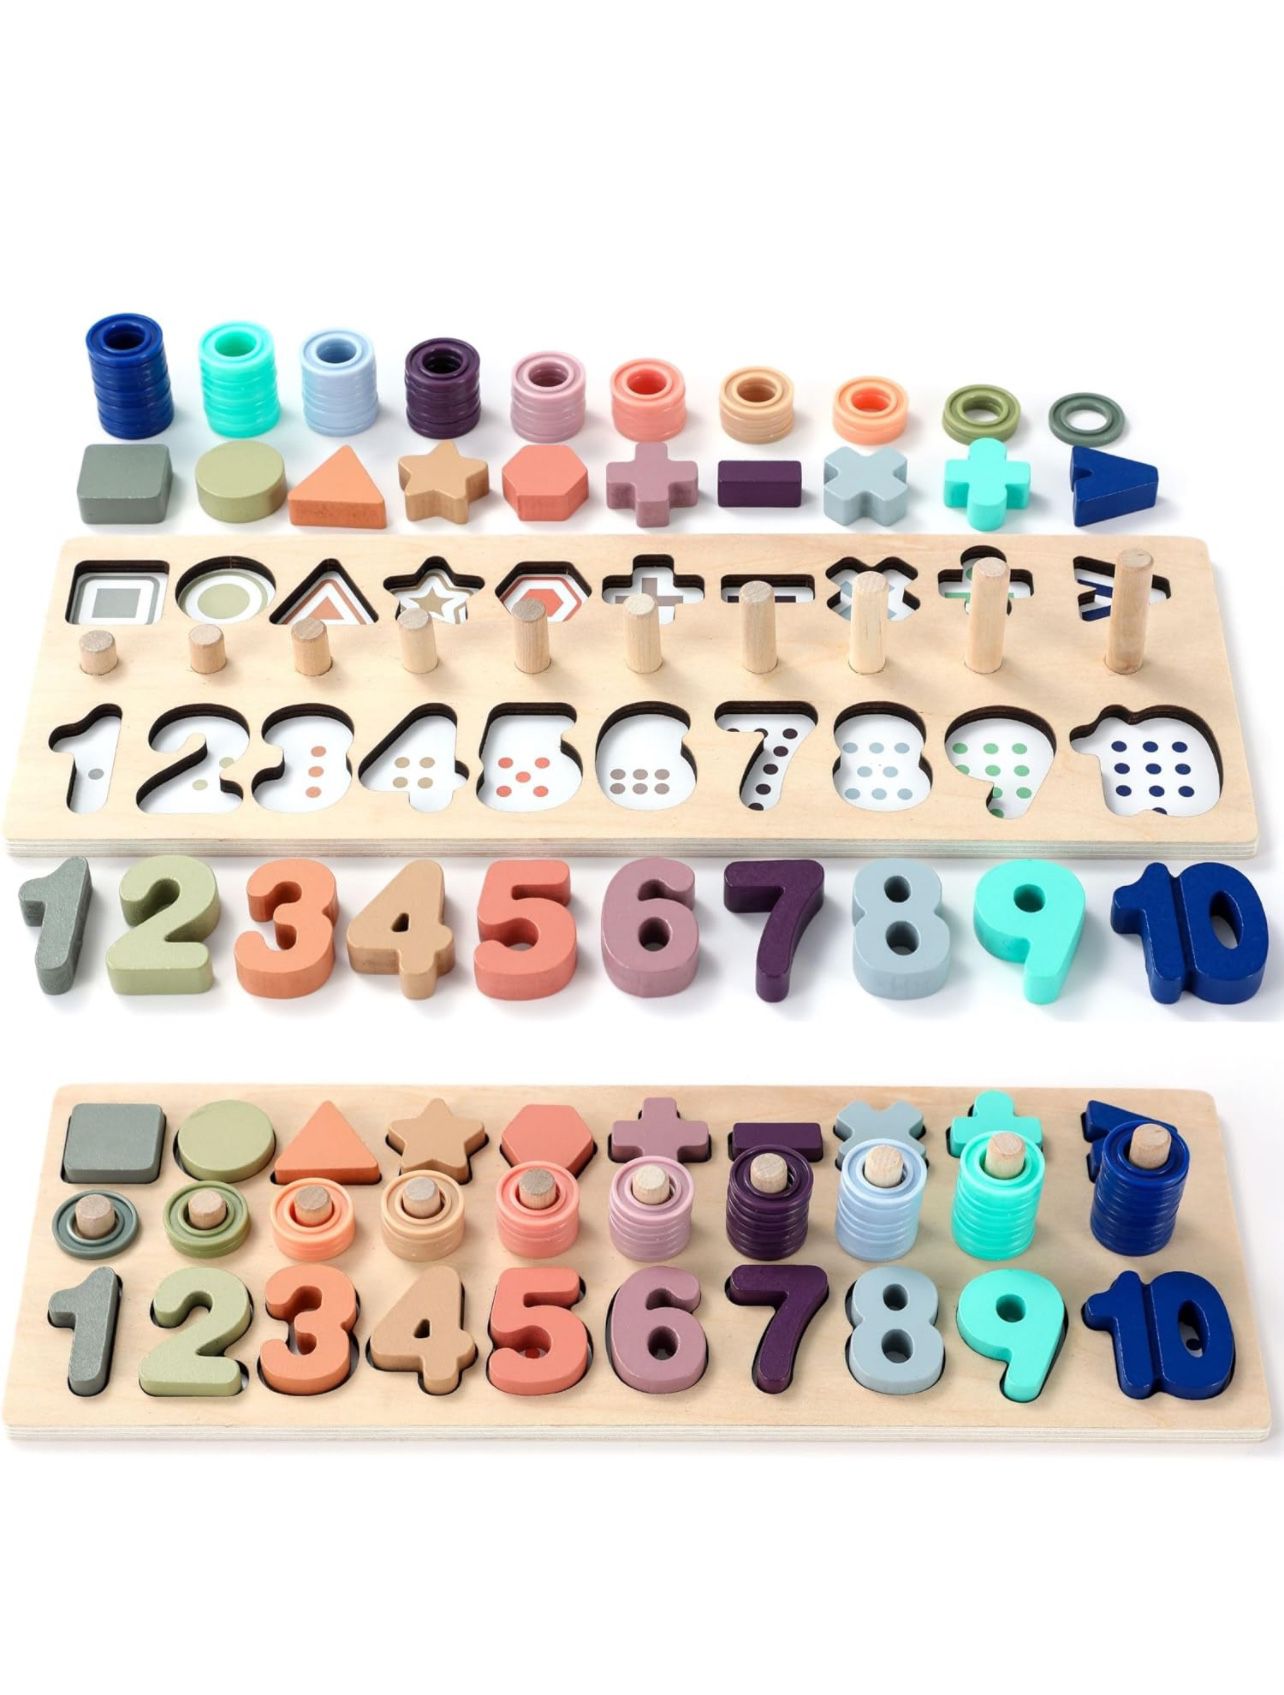 Wooden Number Puzzle for Toddler Activities - Montessori Toys for Toddlers Shape Sorting Counting Game